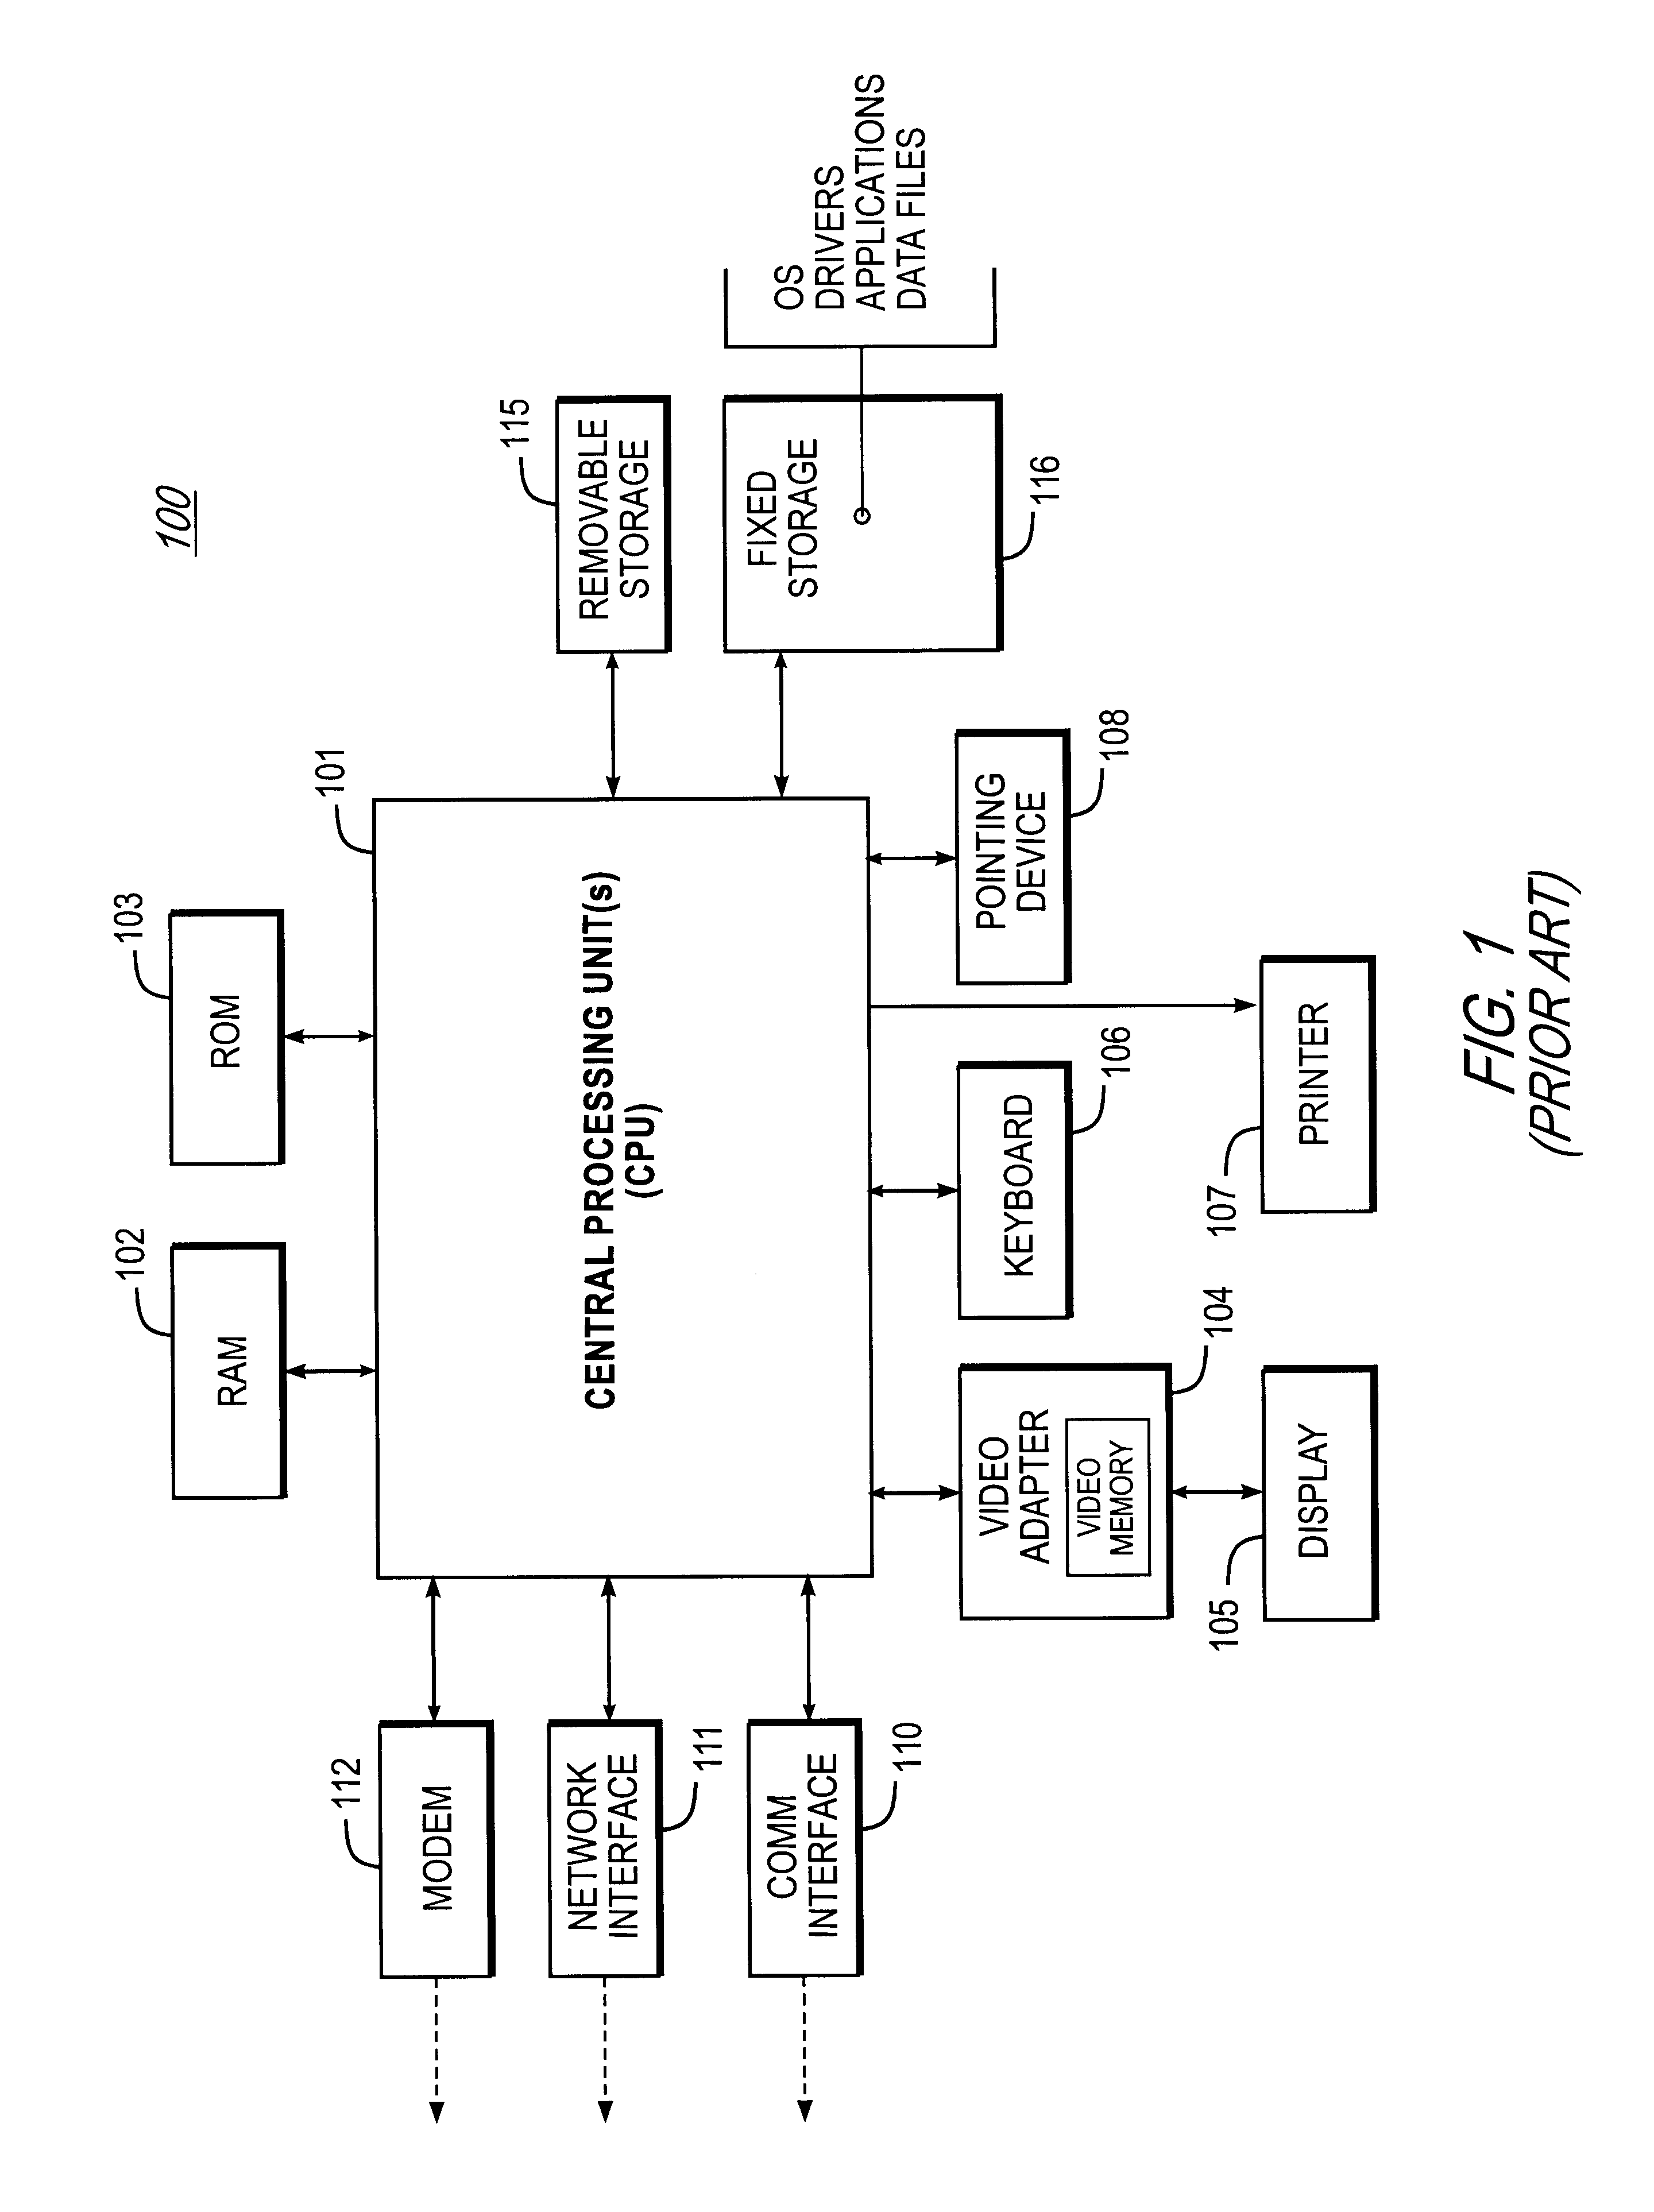 Browser-based system providing methodology for labeling of photo compact discs with a photo-facsimile table of contents